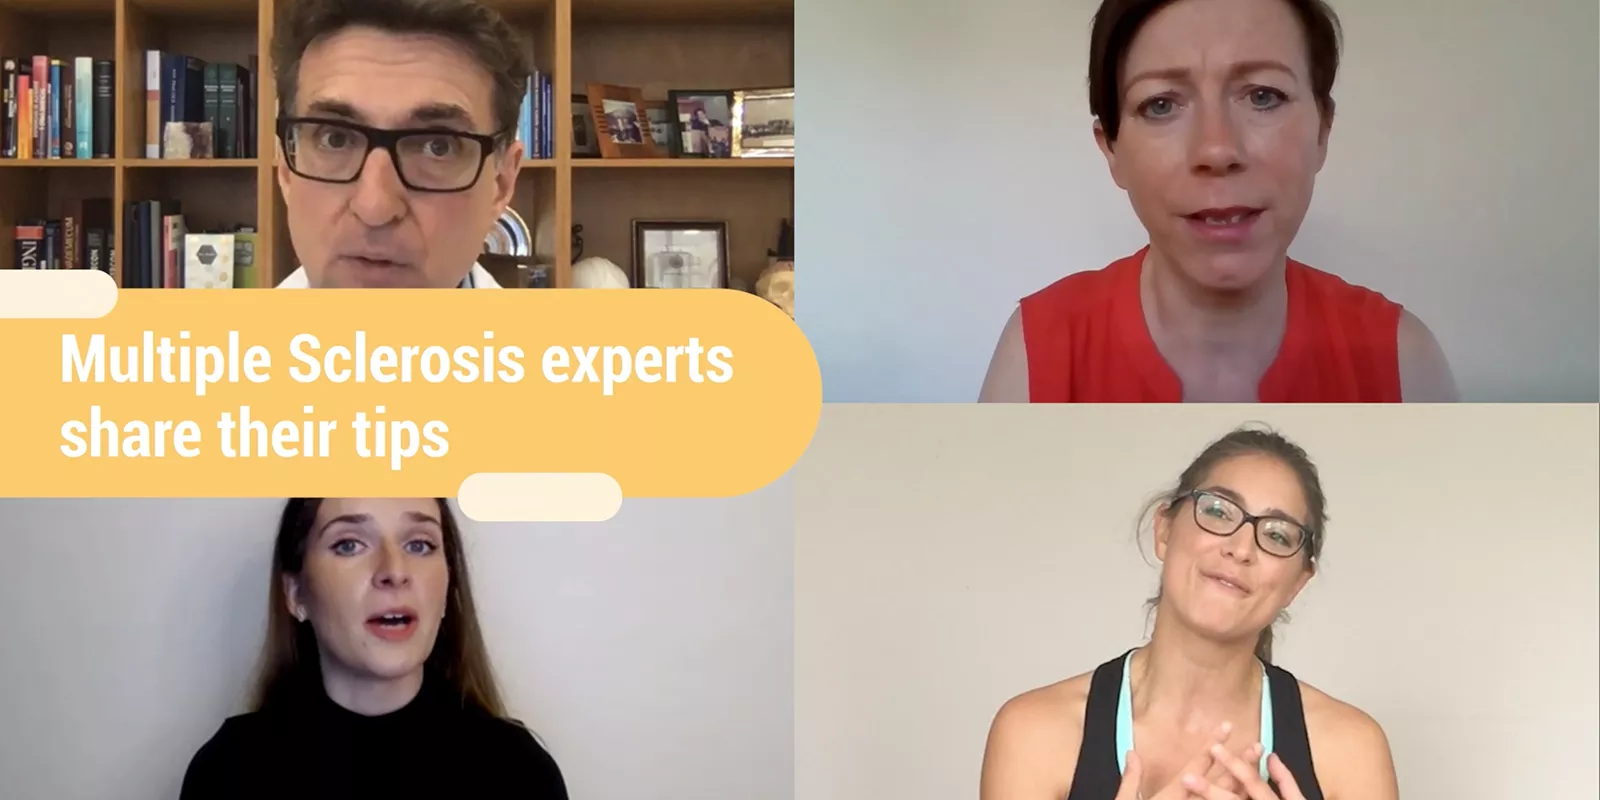 Multiple Sclerosis experts share their tips